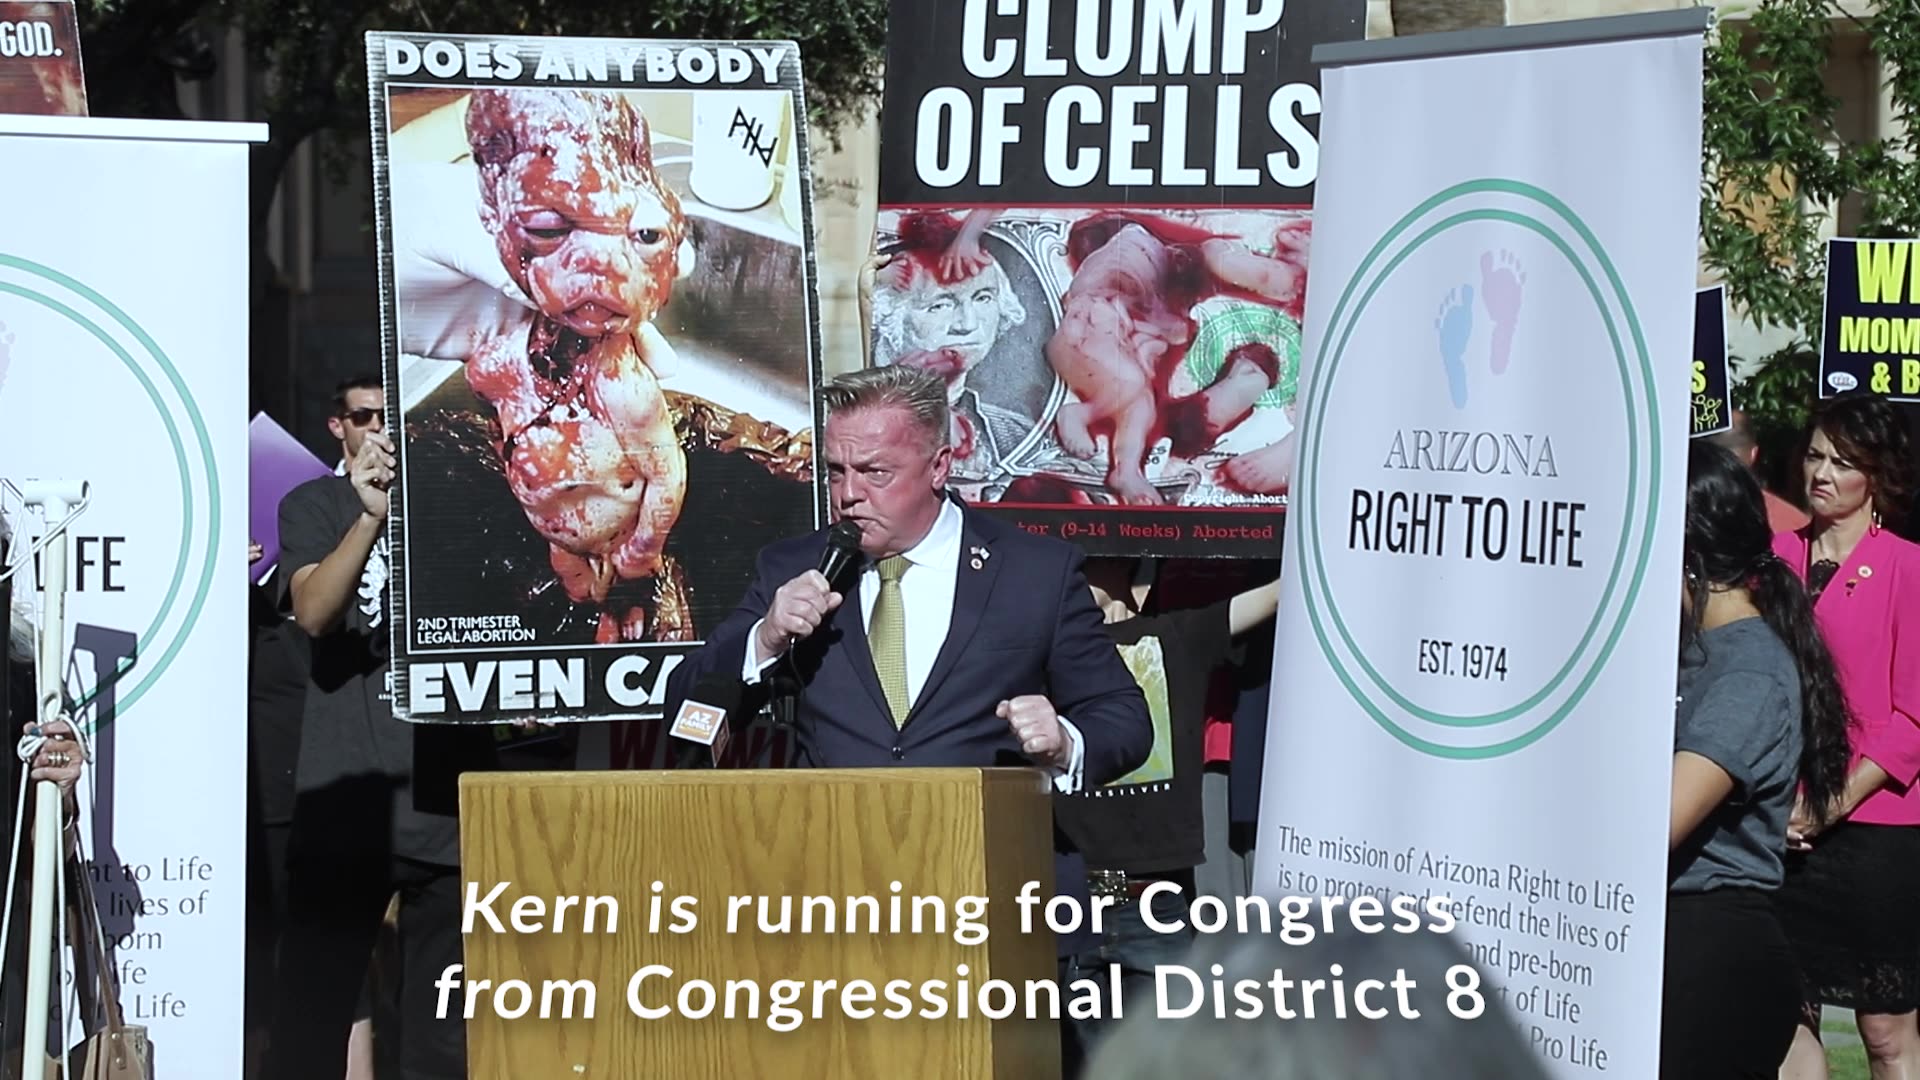 Kern speaks out against abortion